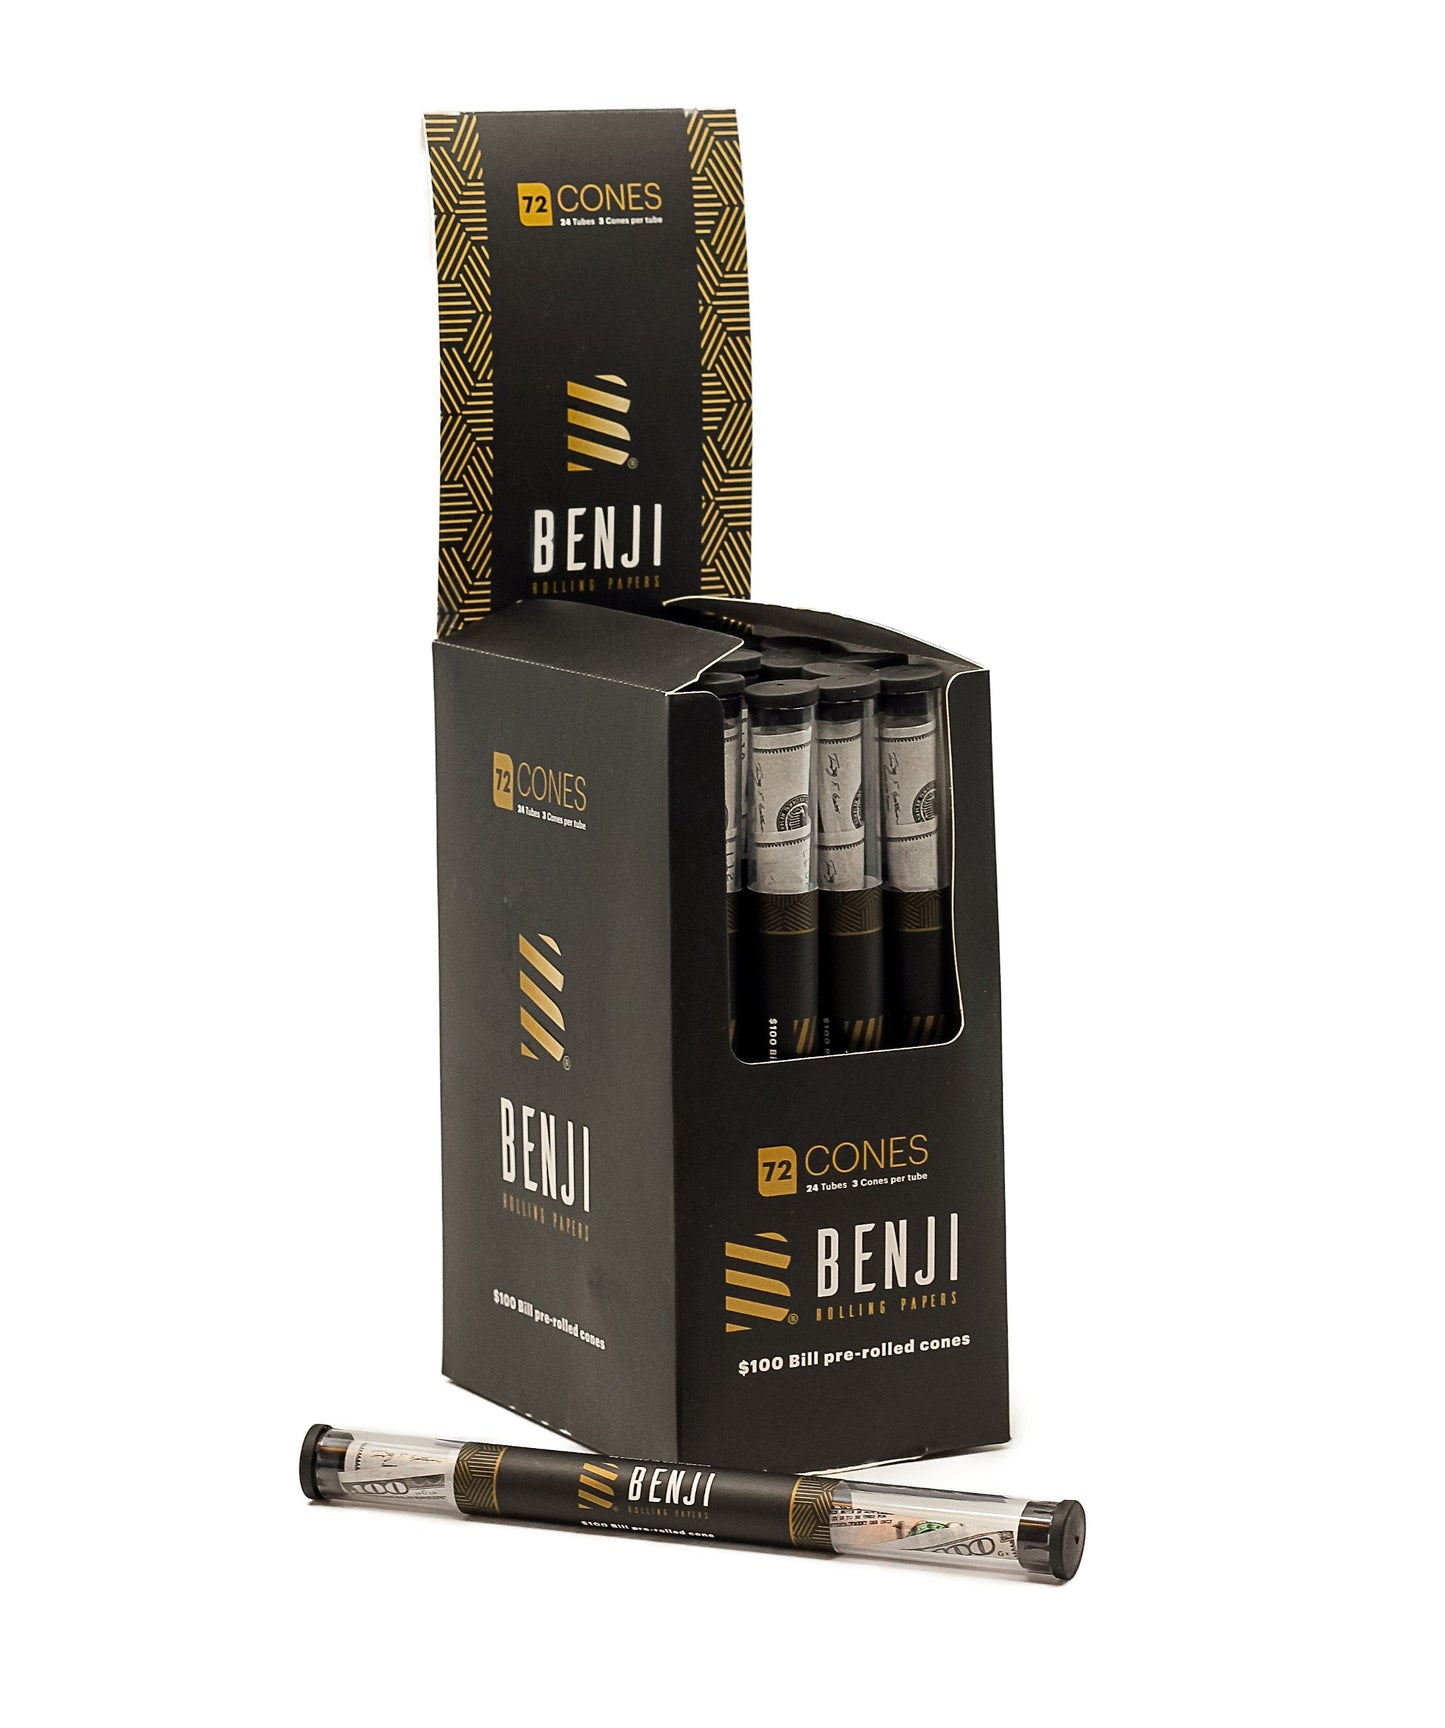 Benji $100 print Pre-rolled Cone Tubes (72 cones)